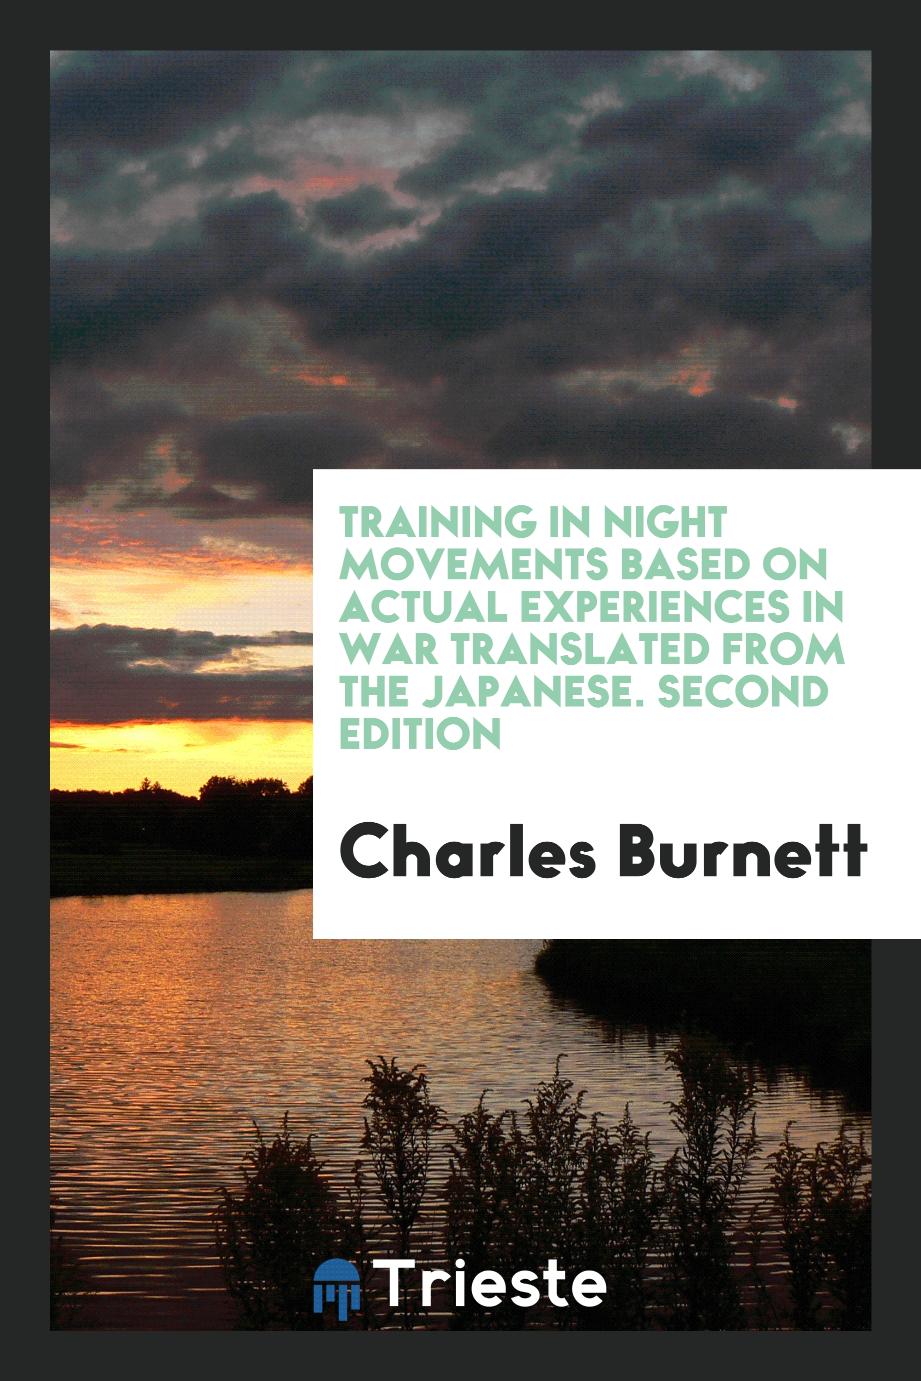 Training in Night Movements Based on Actual Experiences in War Translated from the Japanese. Second Edition